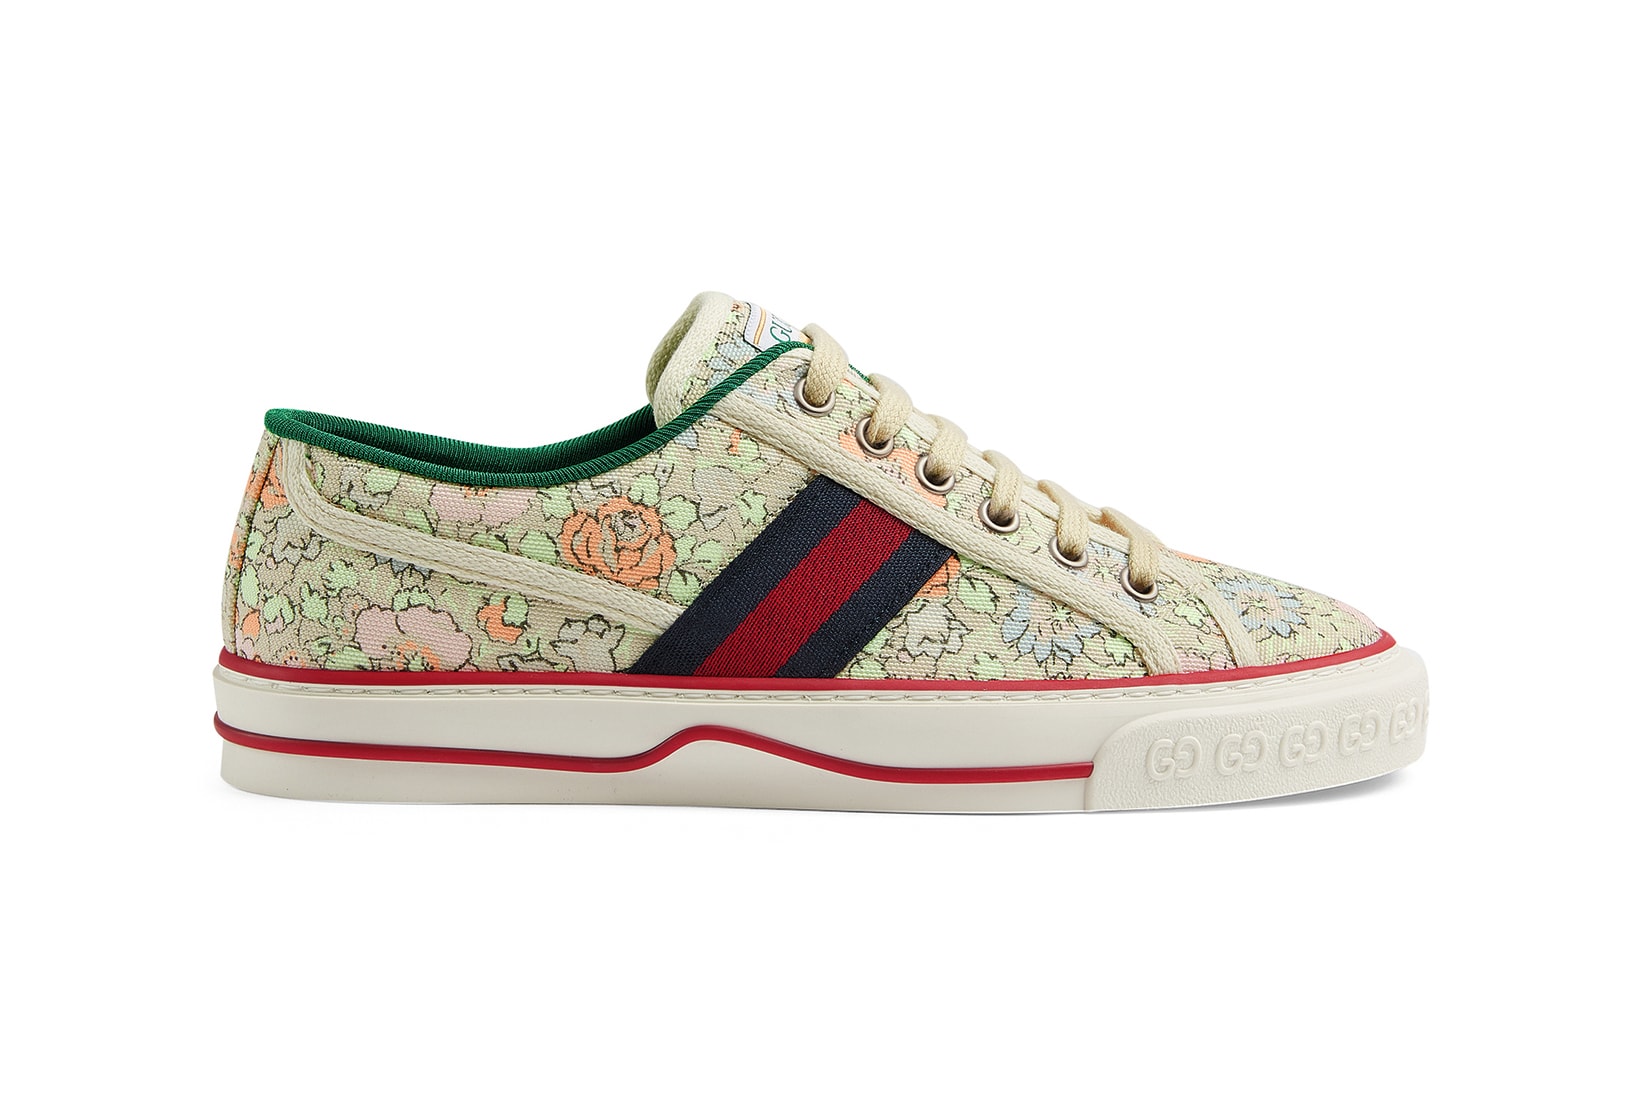 Preview the Liberty x Gucci FW20 Collaboration | Hypebae